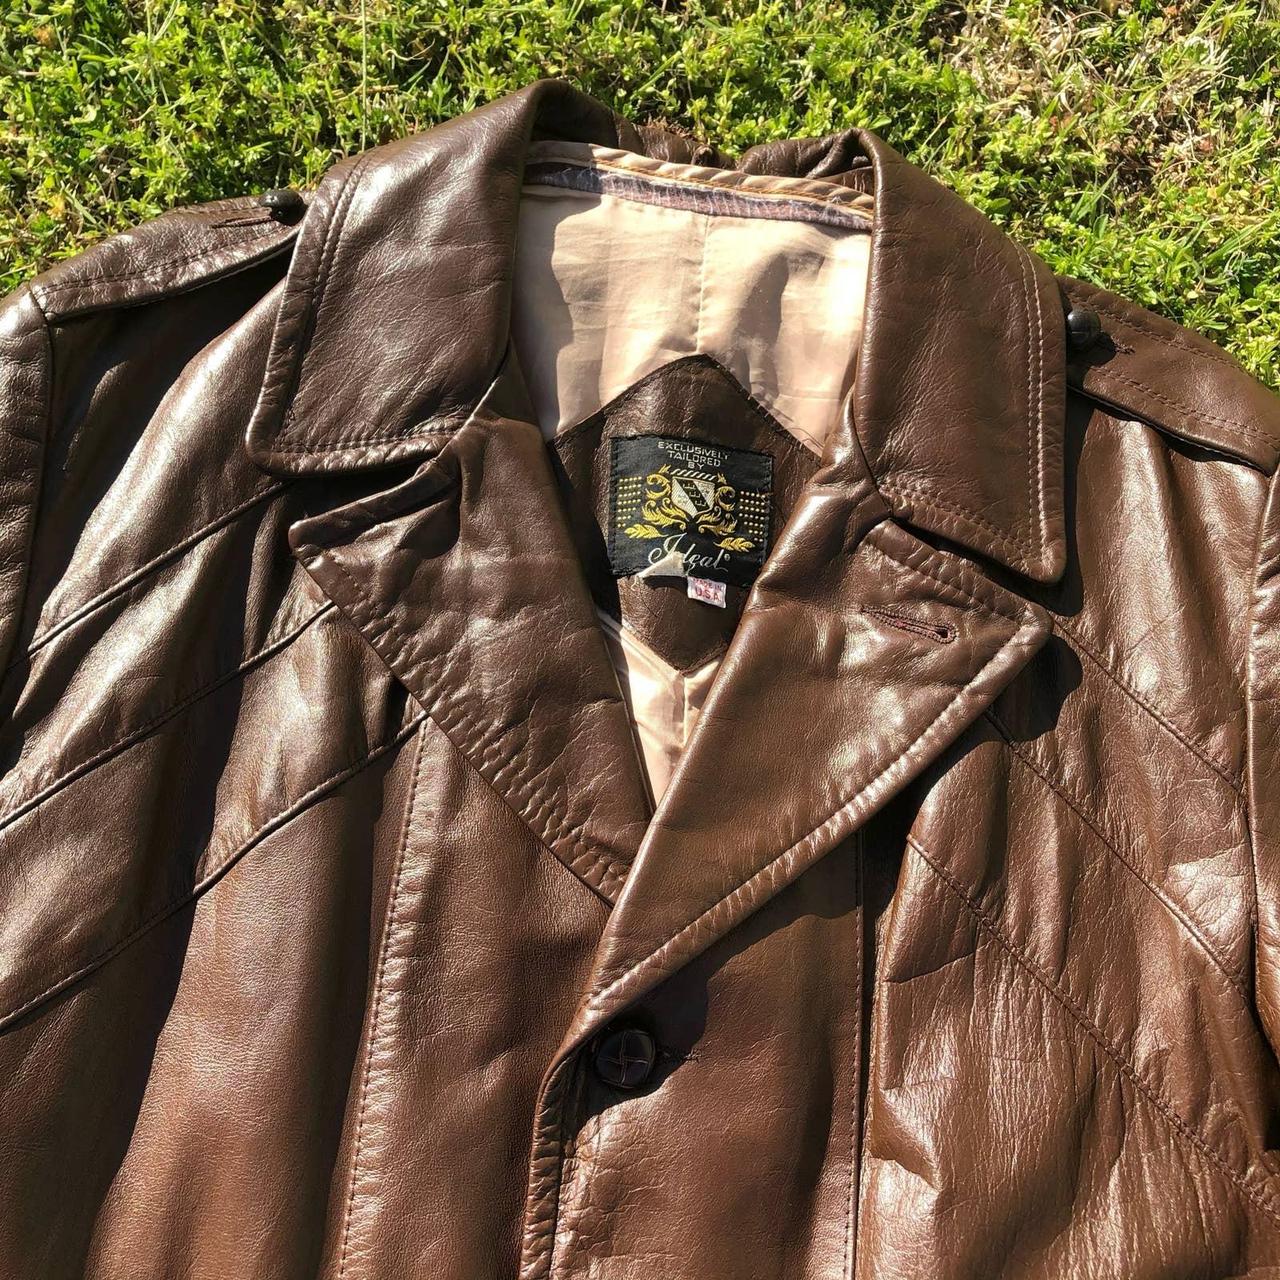 Men's 70s Leather Jacket in Brown